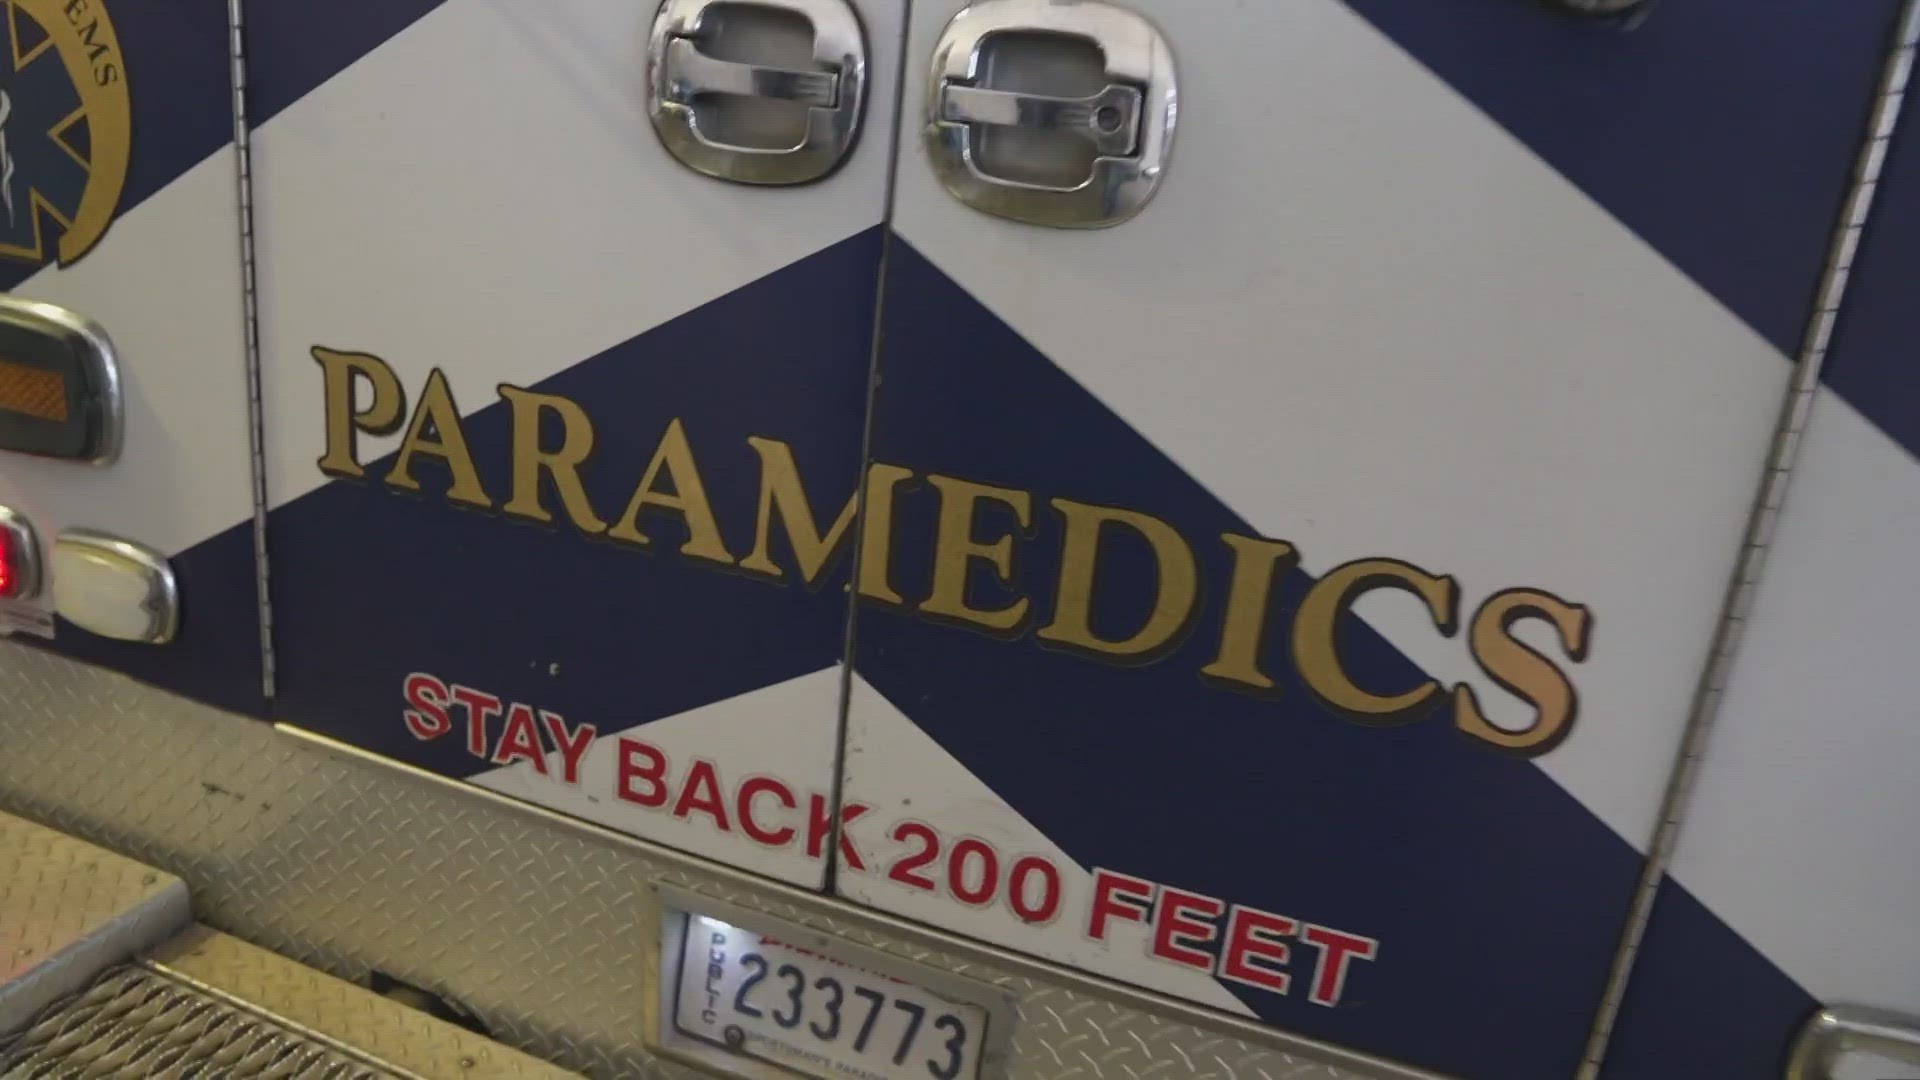 The department is desperately calling for people to apply to become an EMS worker.